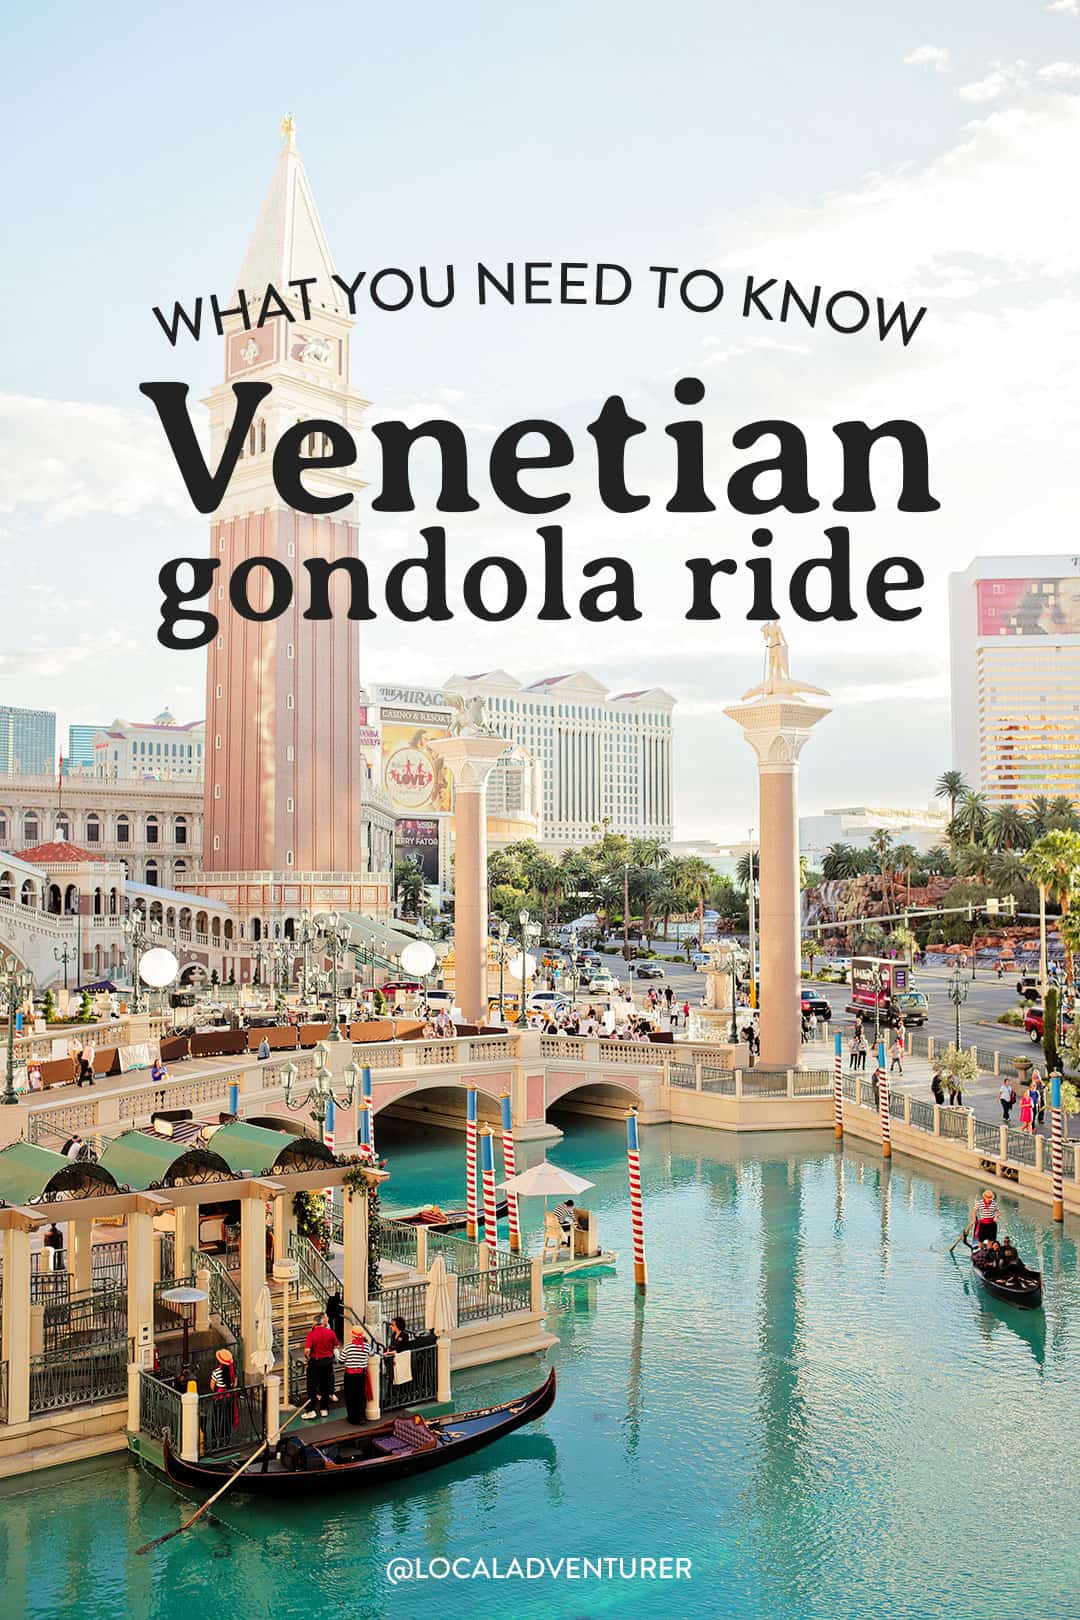 kontrollere Kano Bevægelig The Venetian Gondola Ride in Las Vegas - What You Need to Know